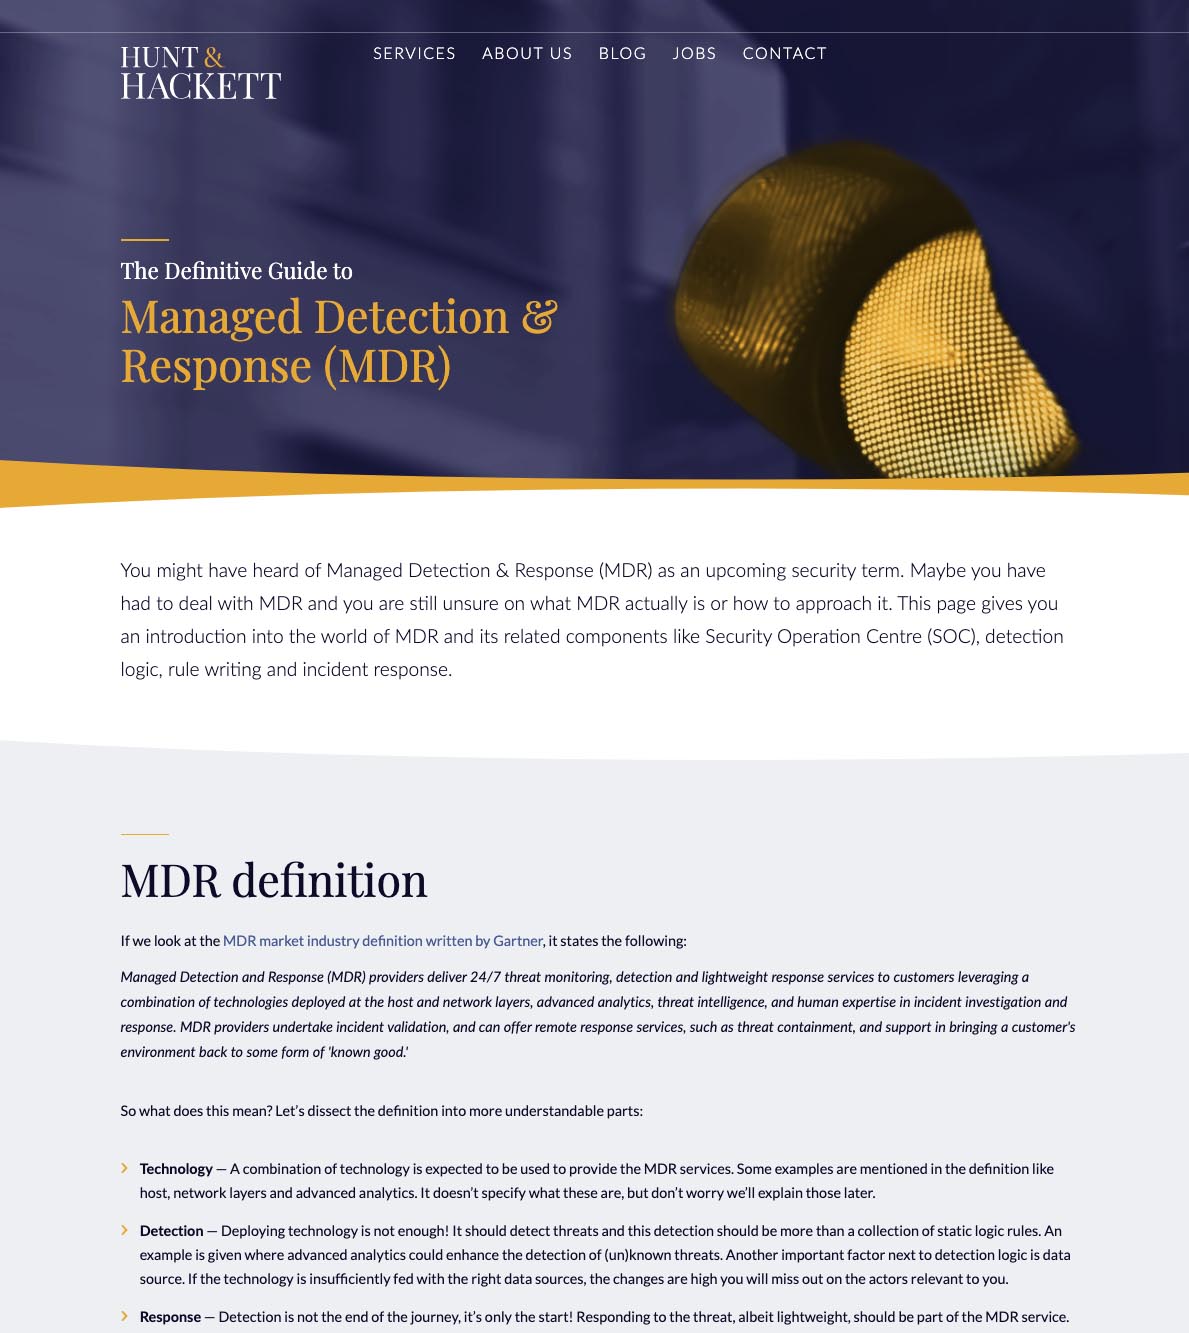 Definitive Guide to Managed Detection & Response (MDR)